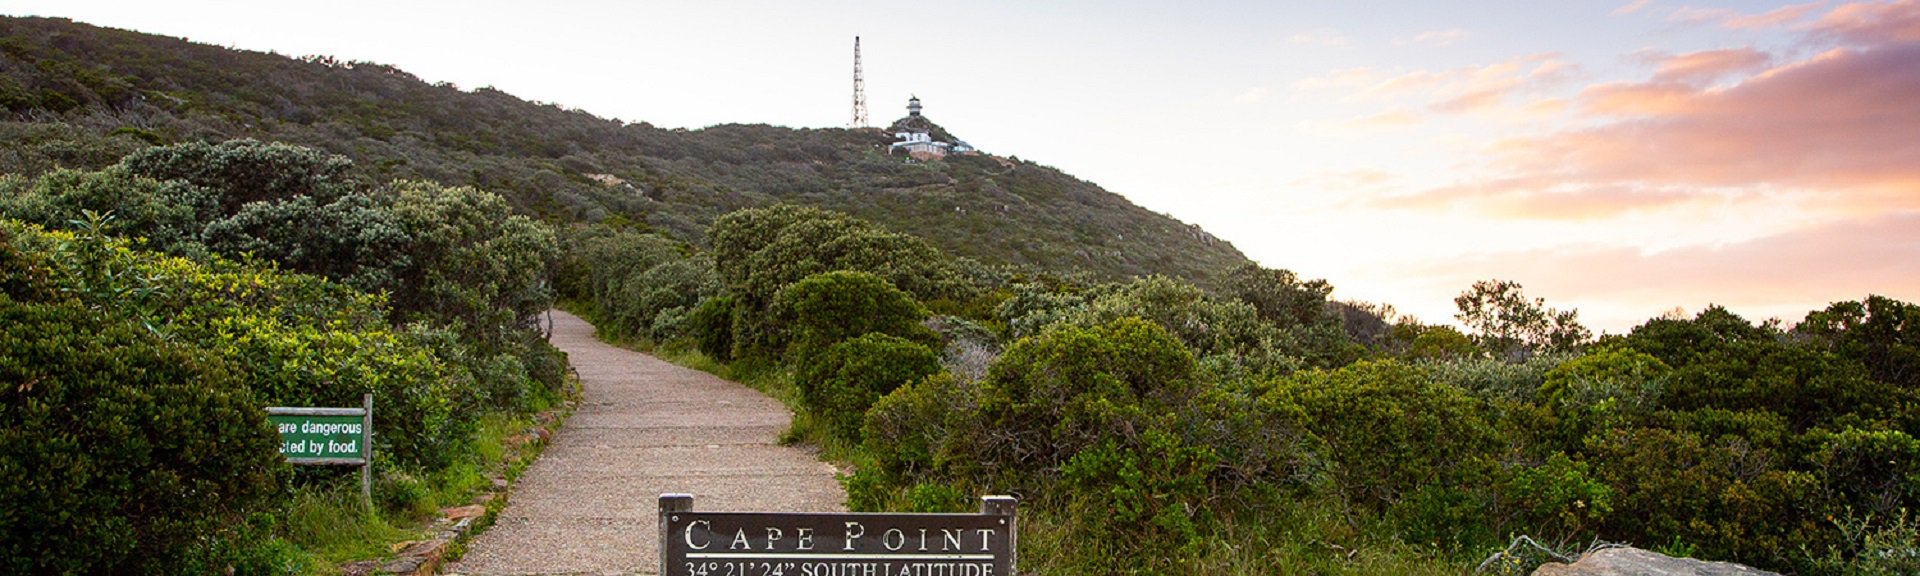 CapePoint | Cape Town | Excursions | Things to do With Kids